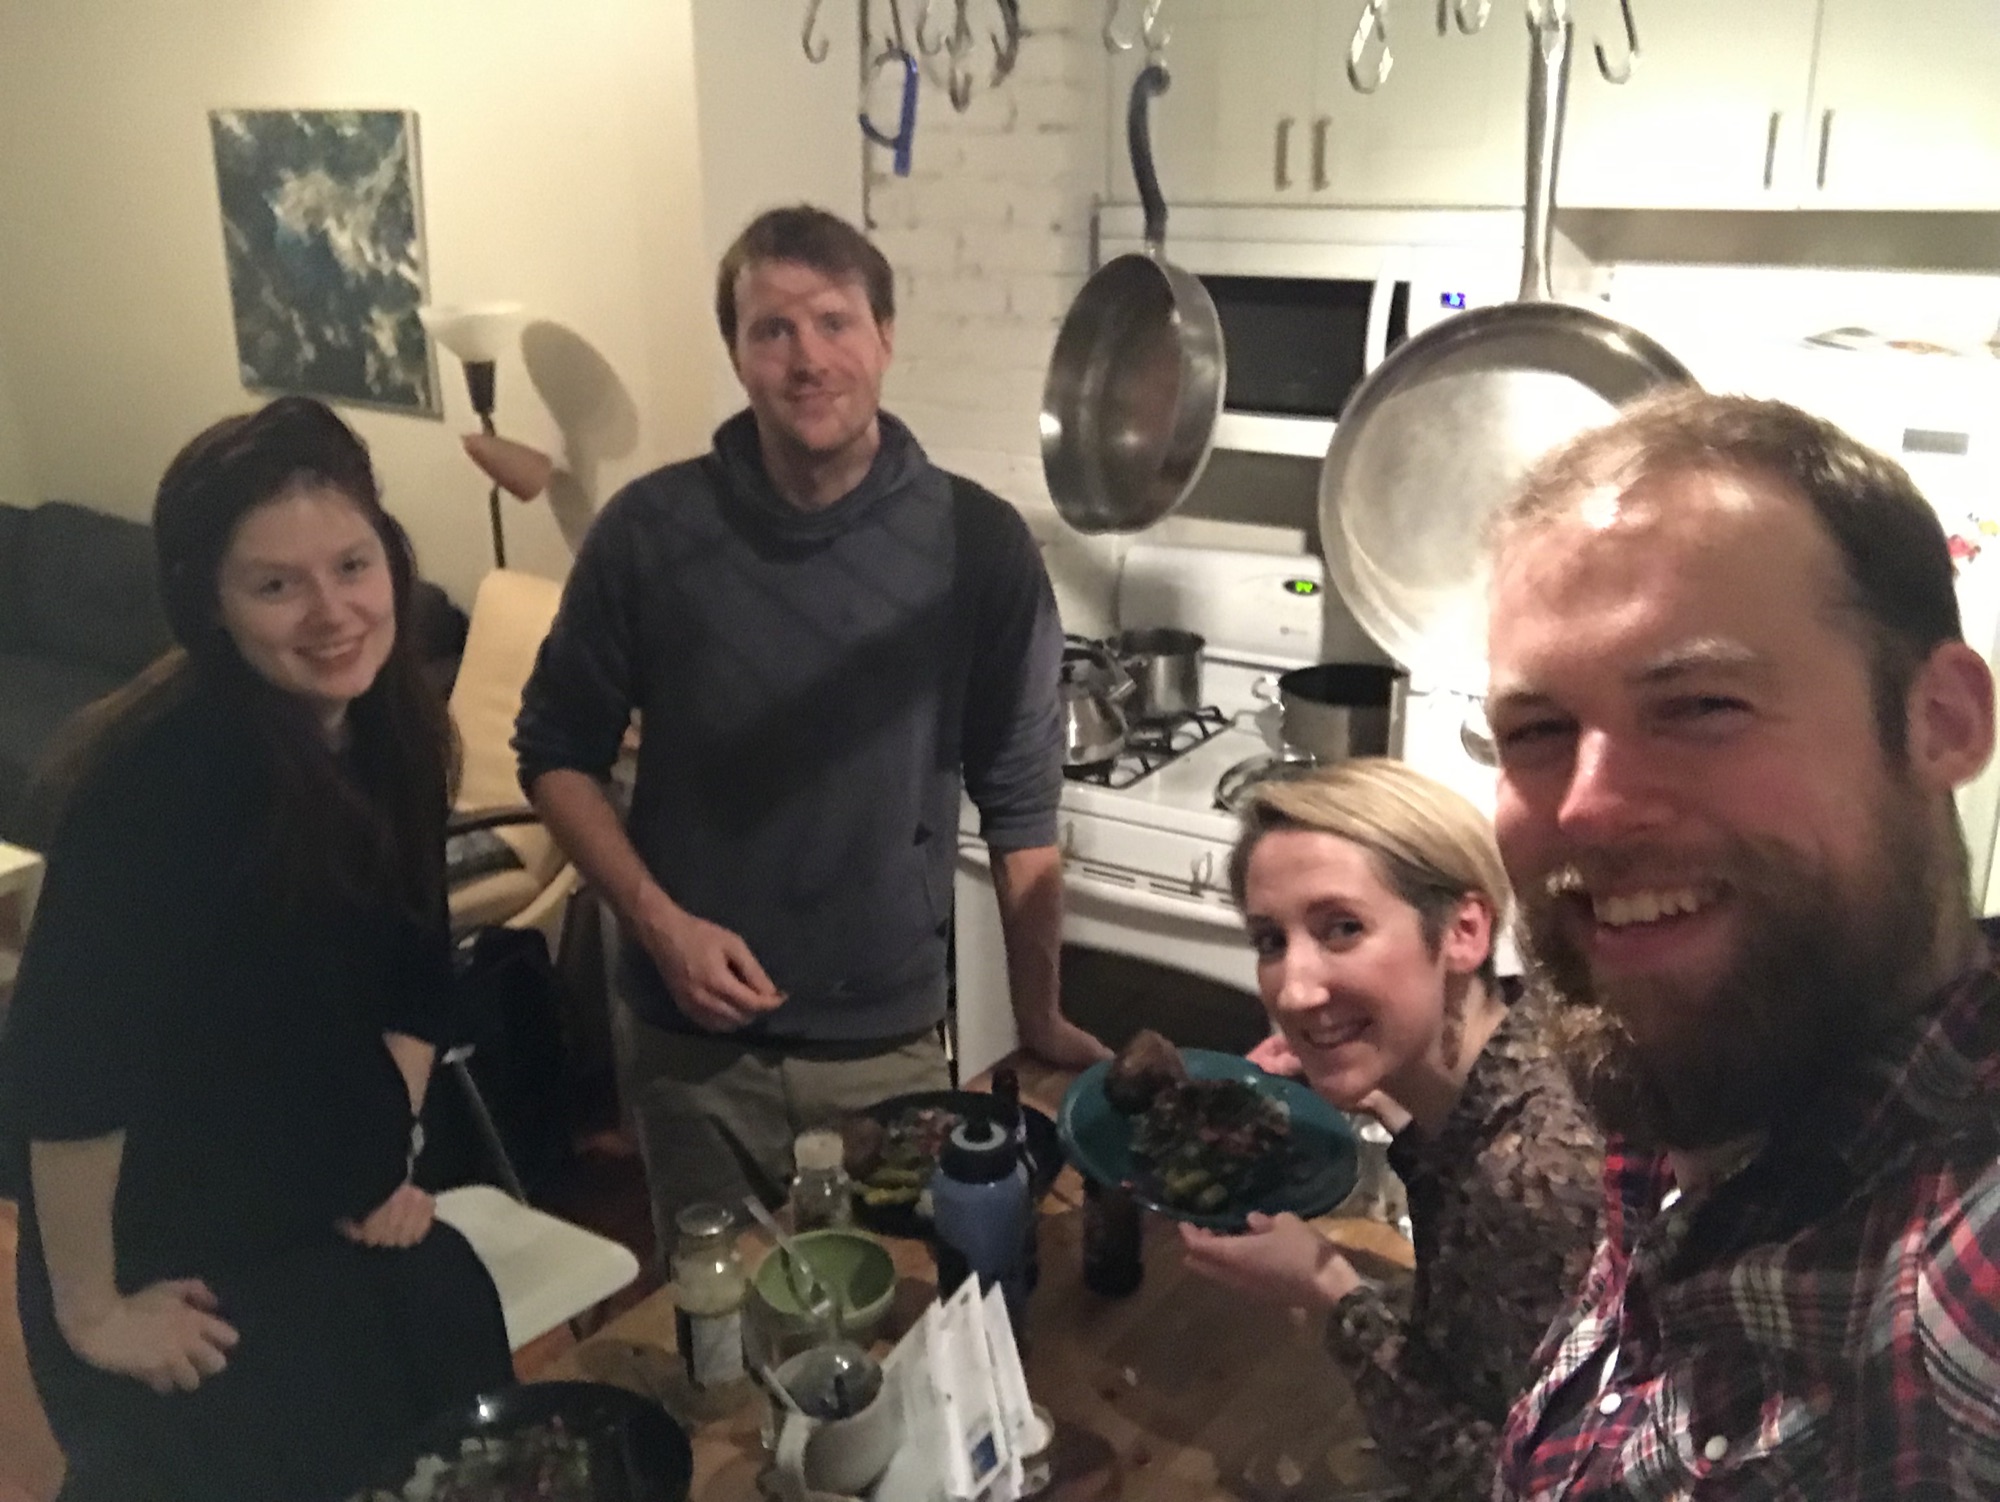 Cooking Dutch food with Dutch and Canadian friends